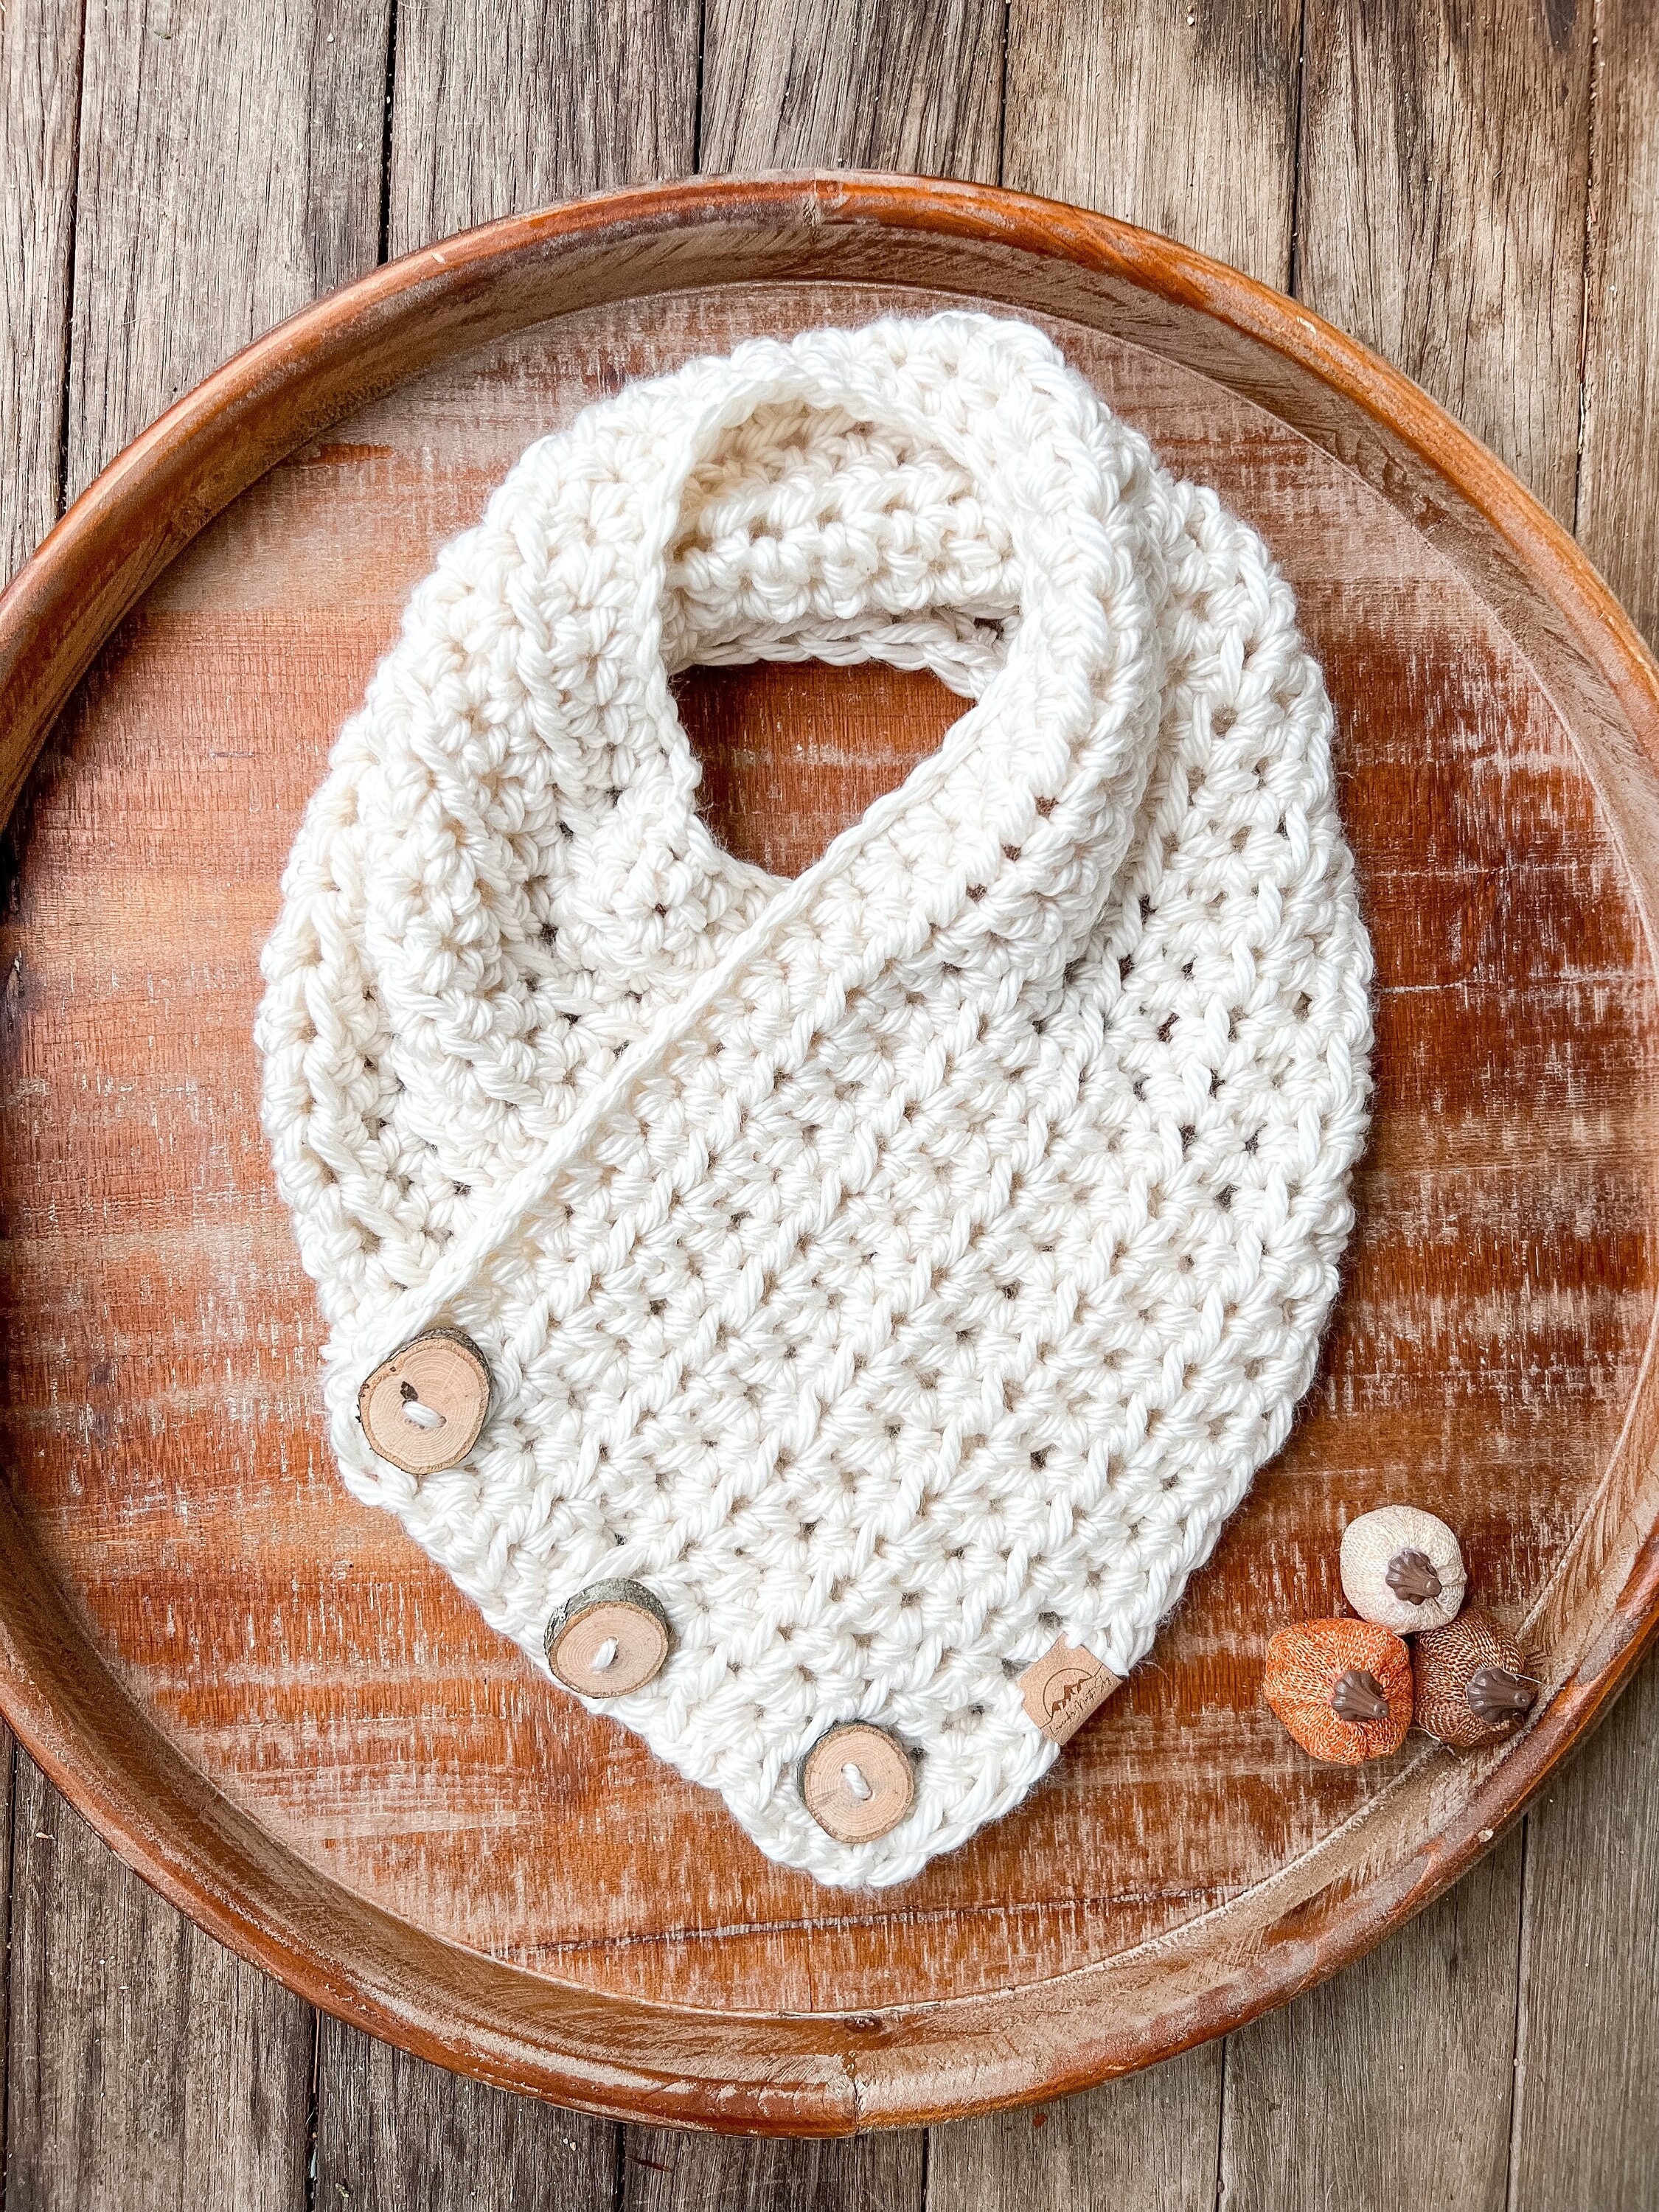 Cream Colored Cowl, 3 Button Scarf, Crochet Cowl, Knit Cowl, Winter White  Scarf, Neck Warmer, Indoor Cowl